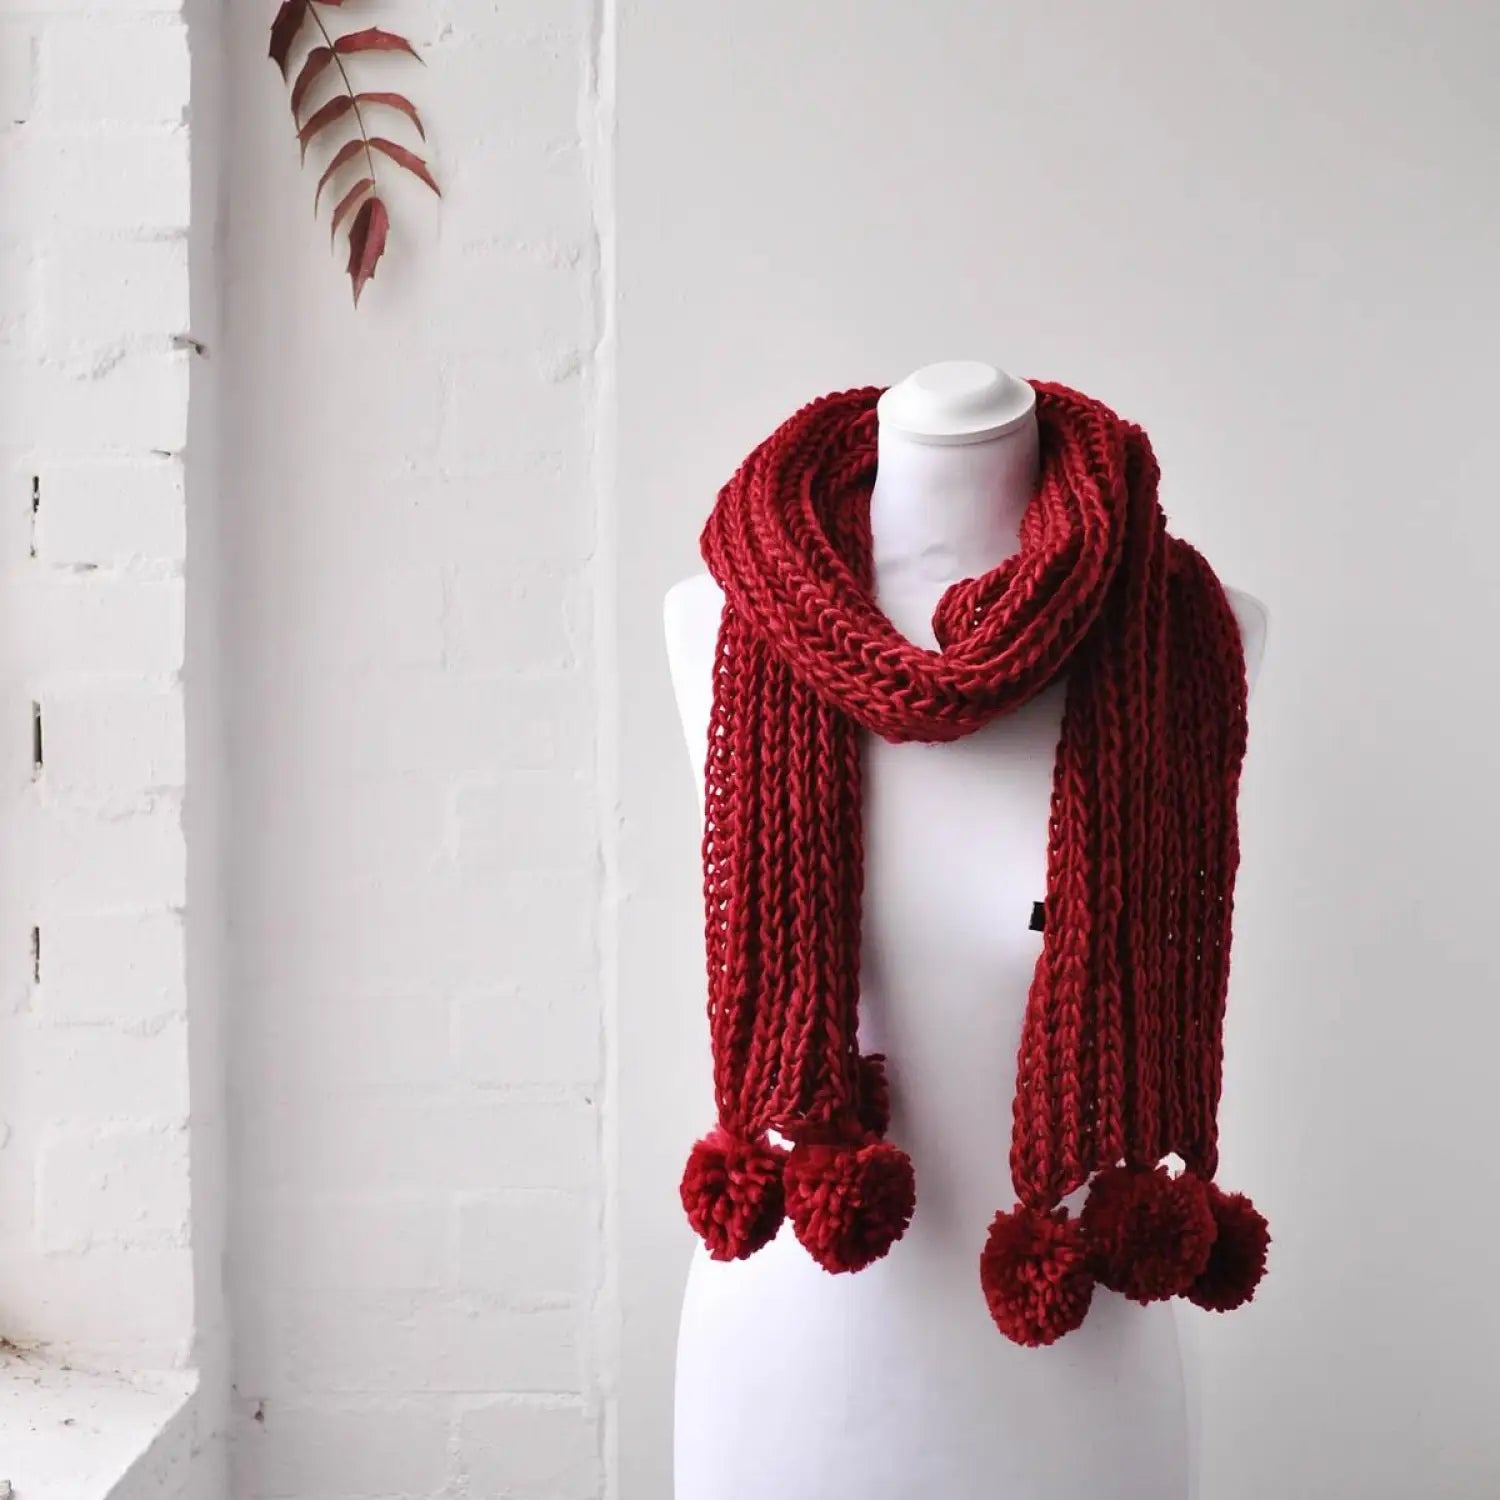 Chunky knit winter scarf with pom pom accents on mannequin